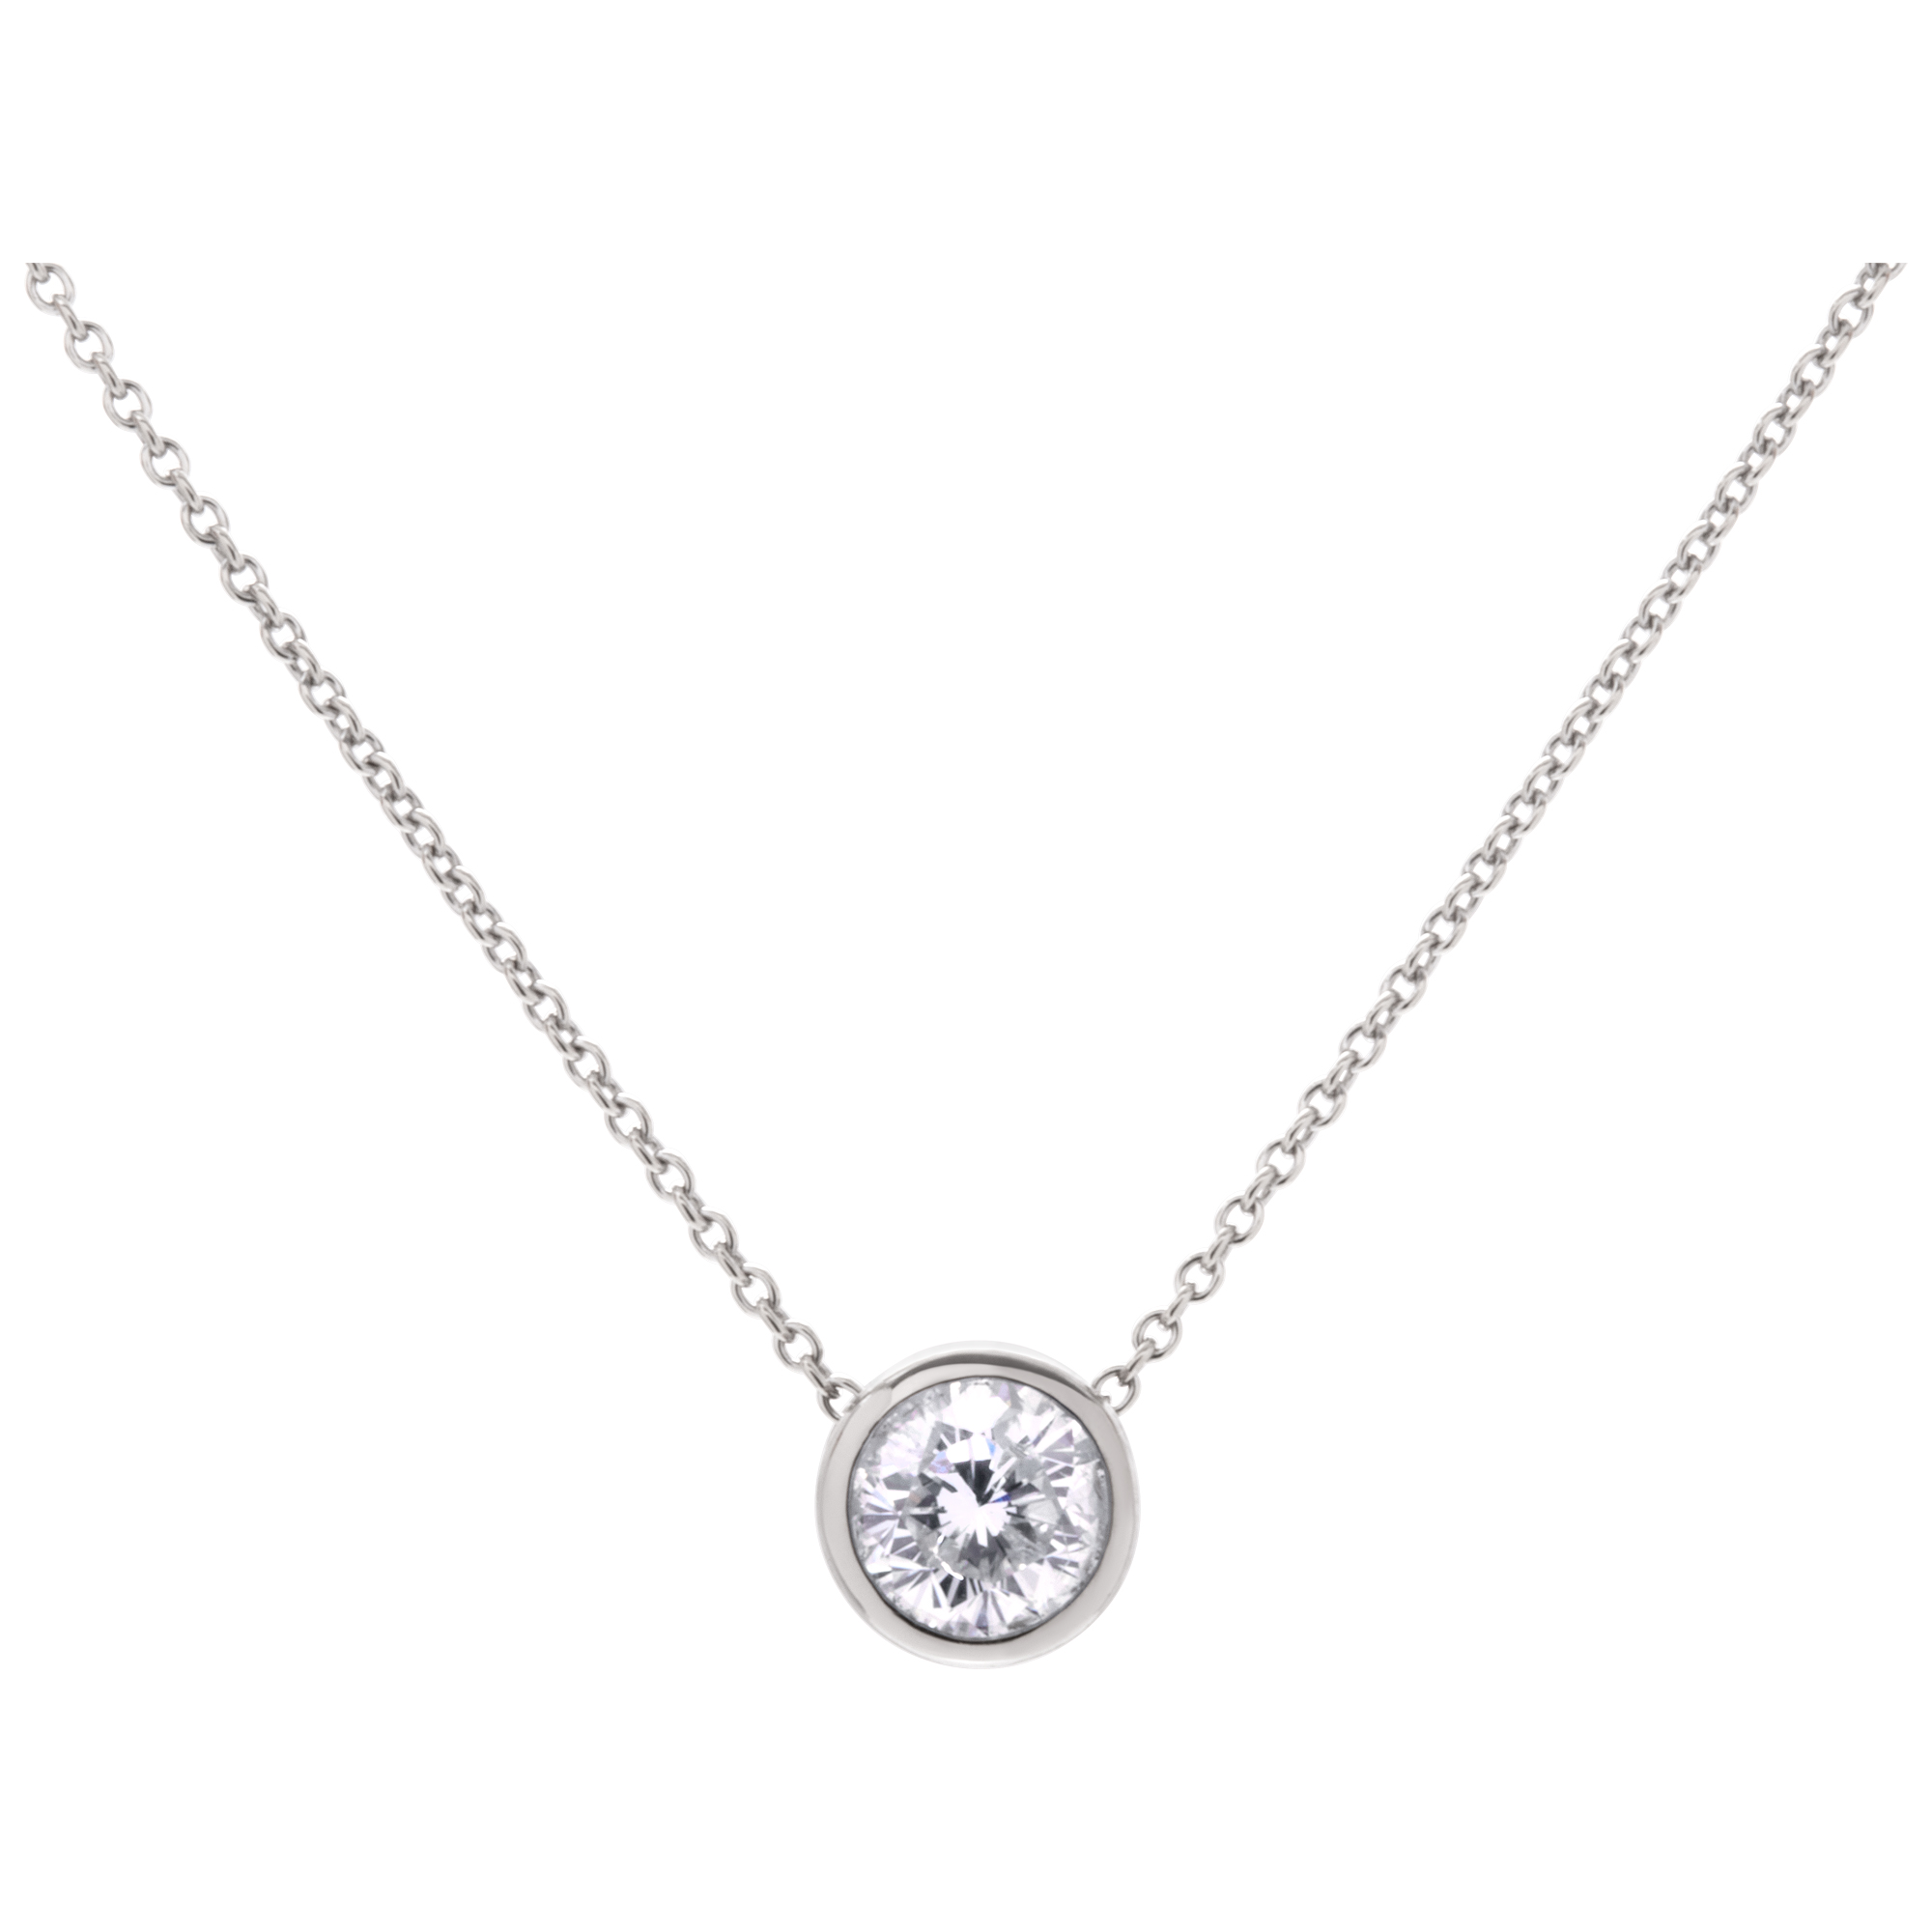 Diamond necklace approx 0.50 cts image 1